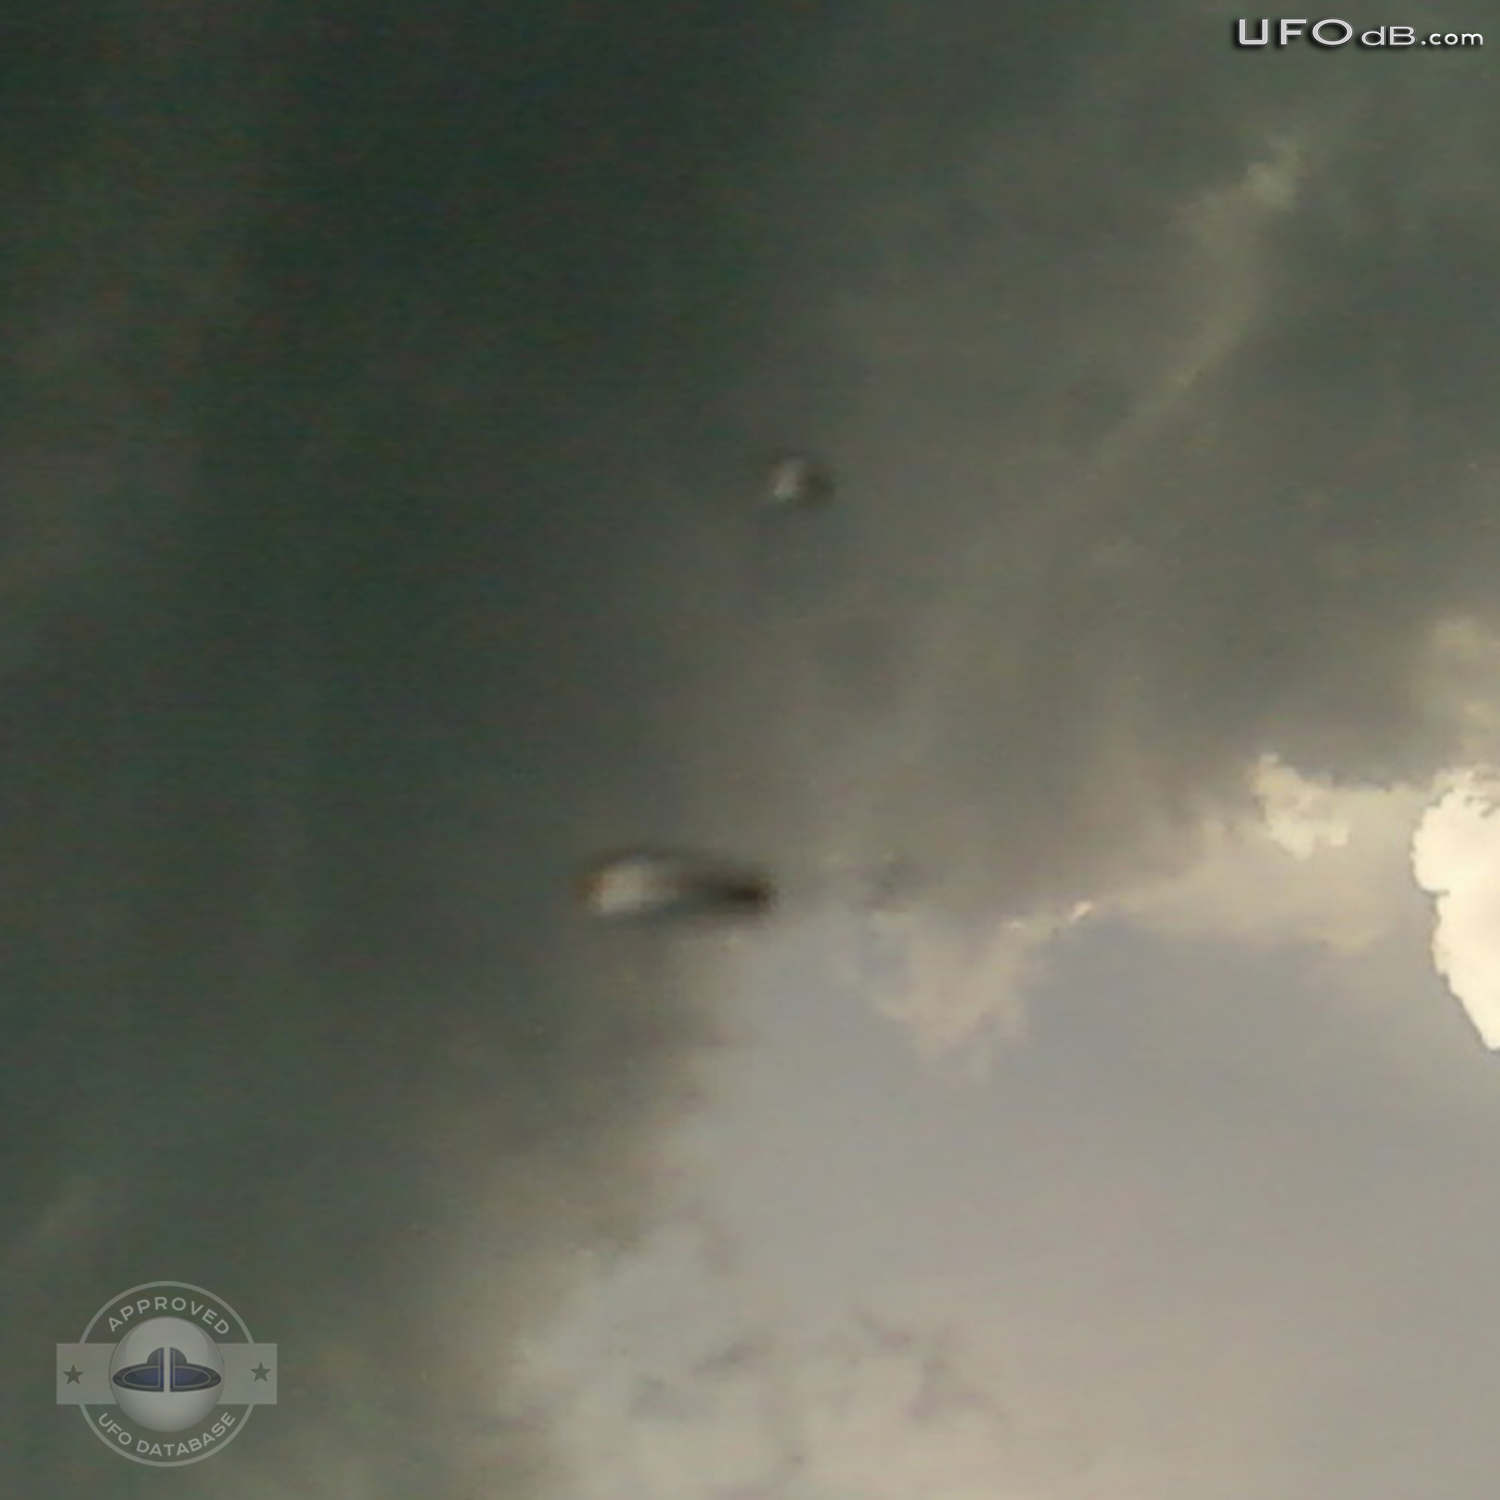 Fort Worth Texas Storm Picture reveals UFOs near clouds | May 24 2011 UFO Picture #343-3